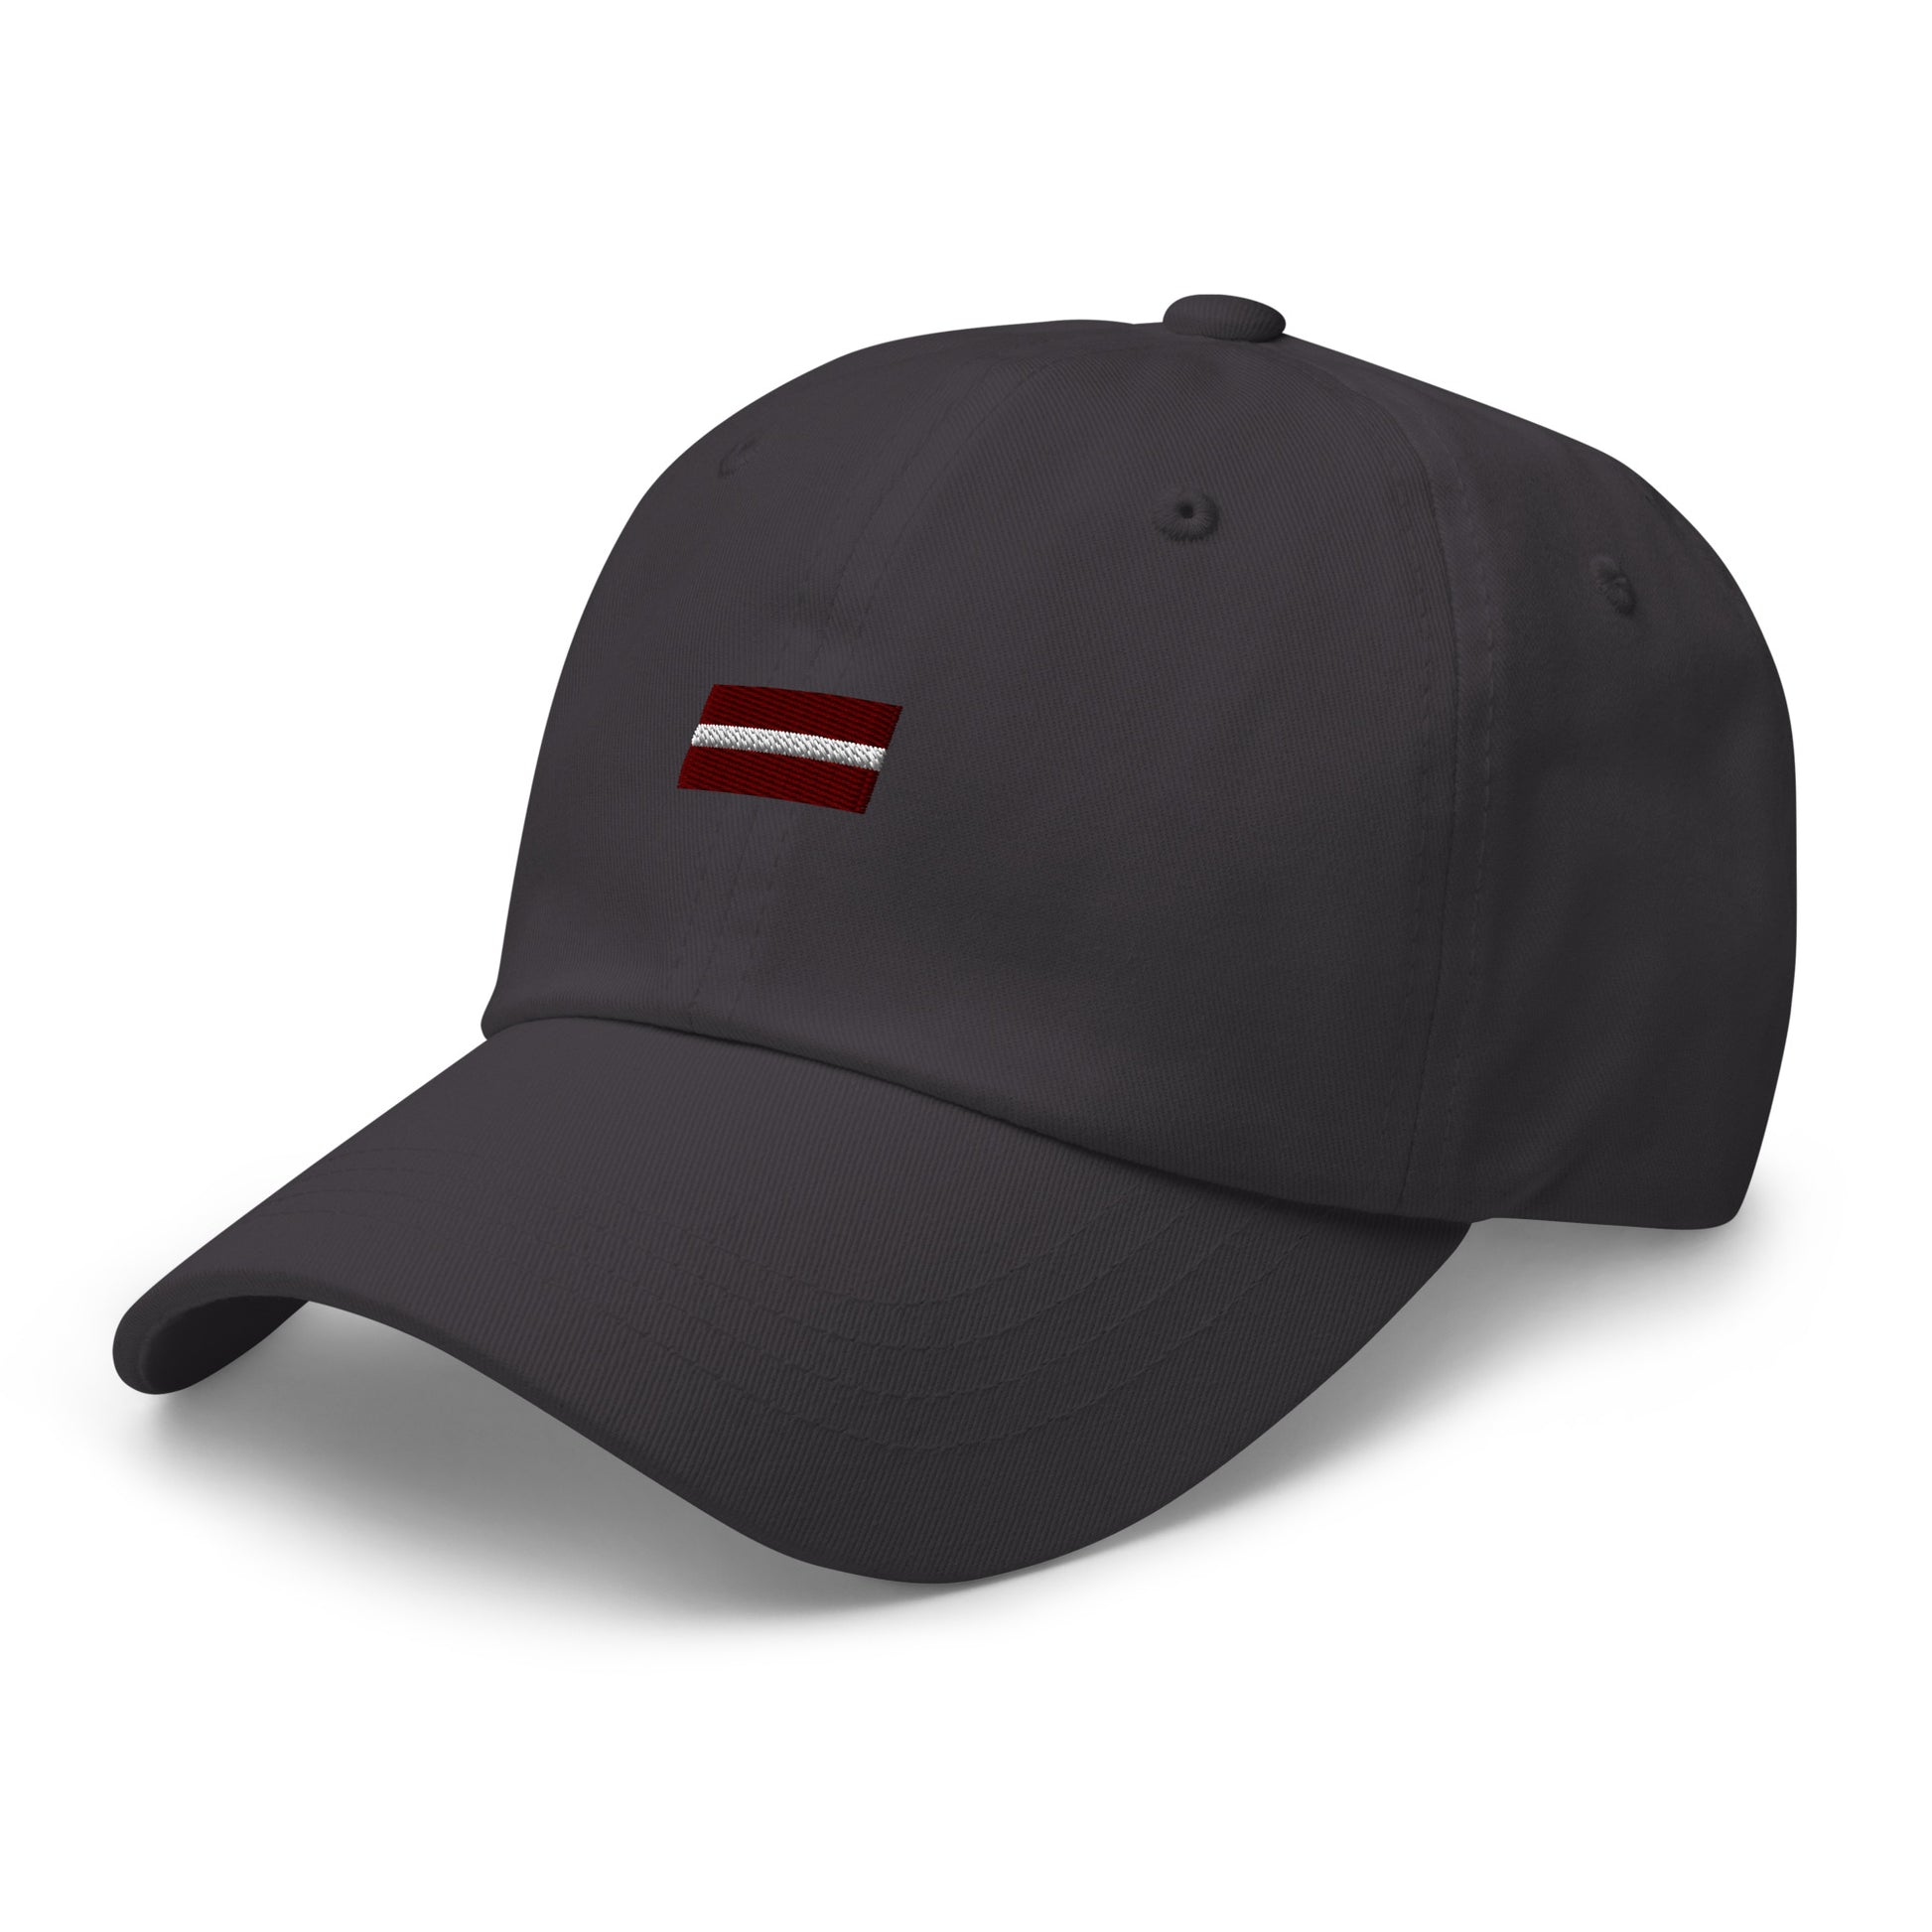 cap-from-the-front-with-latvian-flag